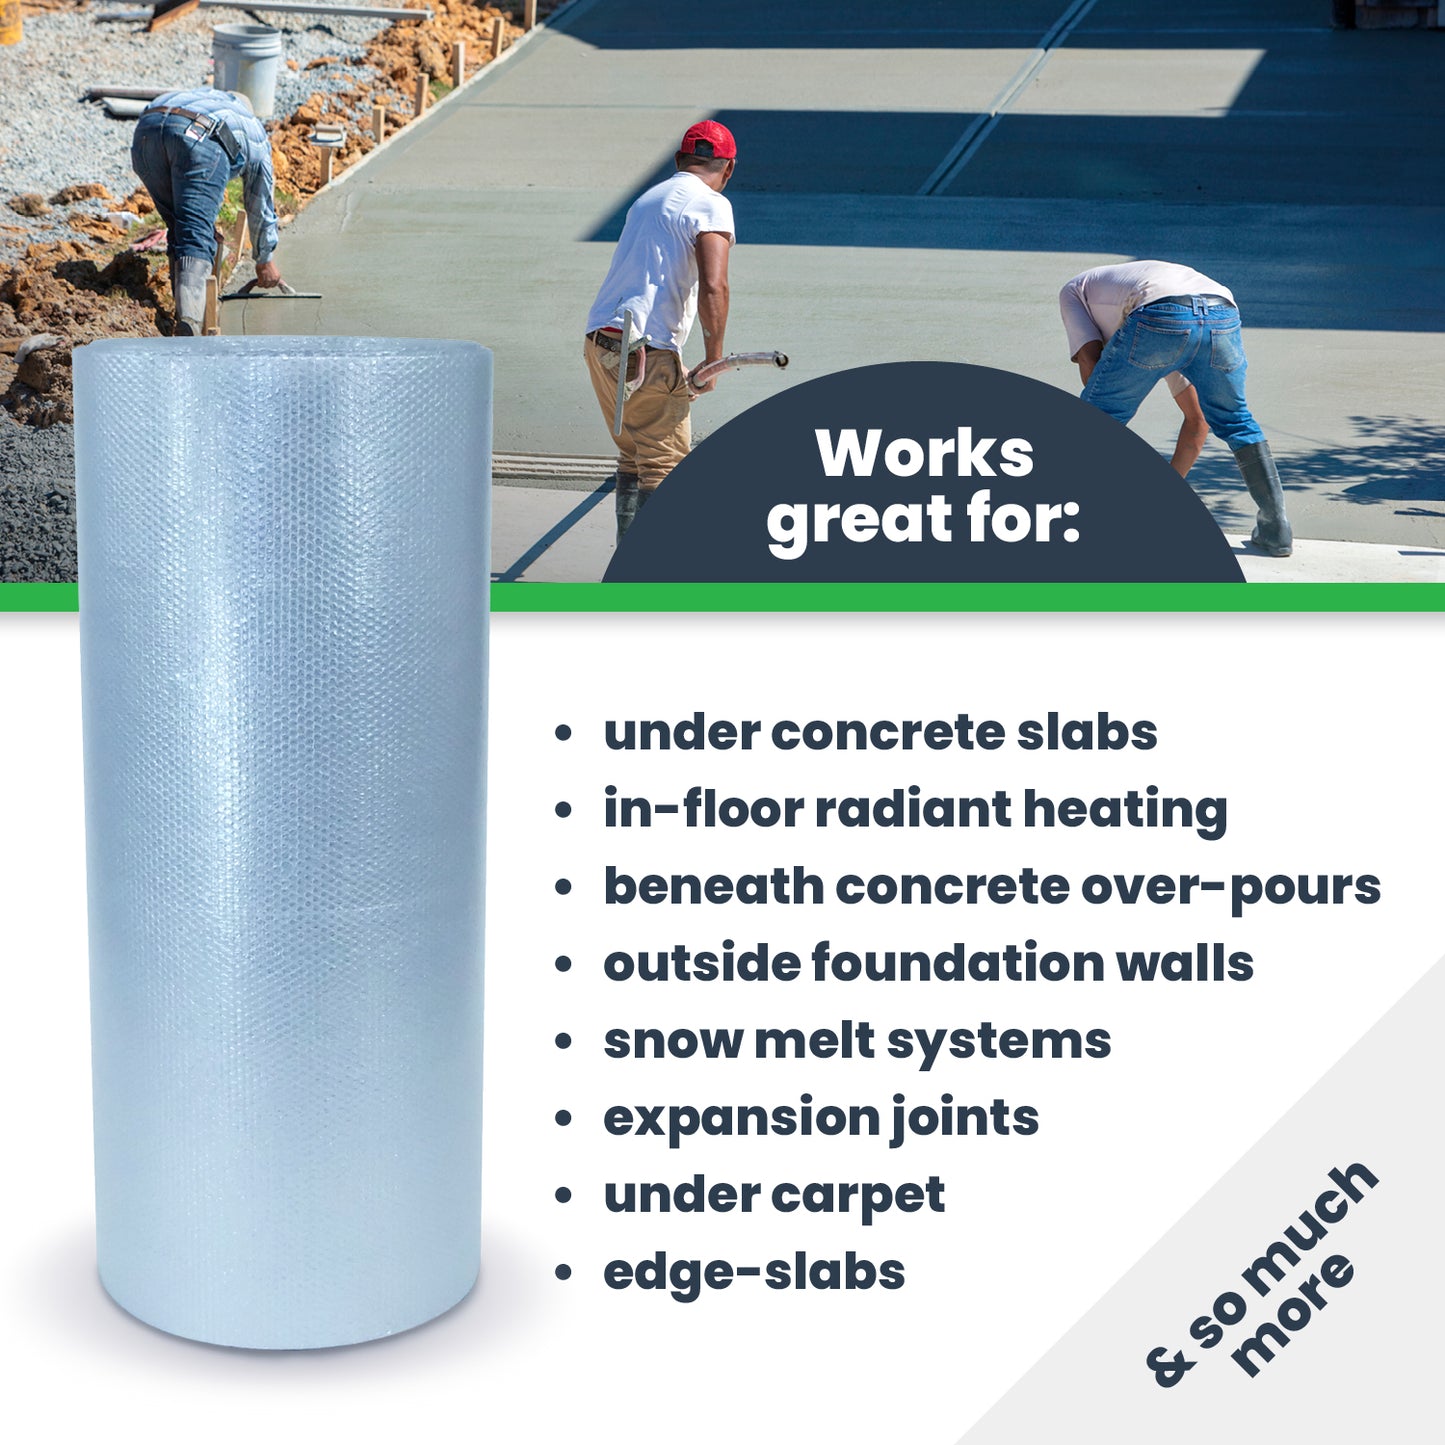 Under Slab Insulation works great under concrete slabs, in-floor radiant heating, outside foundation walls, snow melt systems, expansion joints, and more